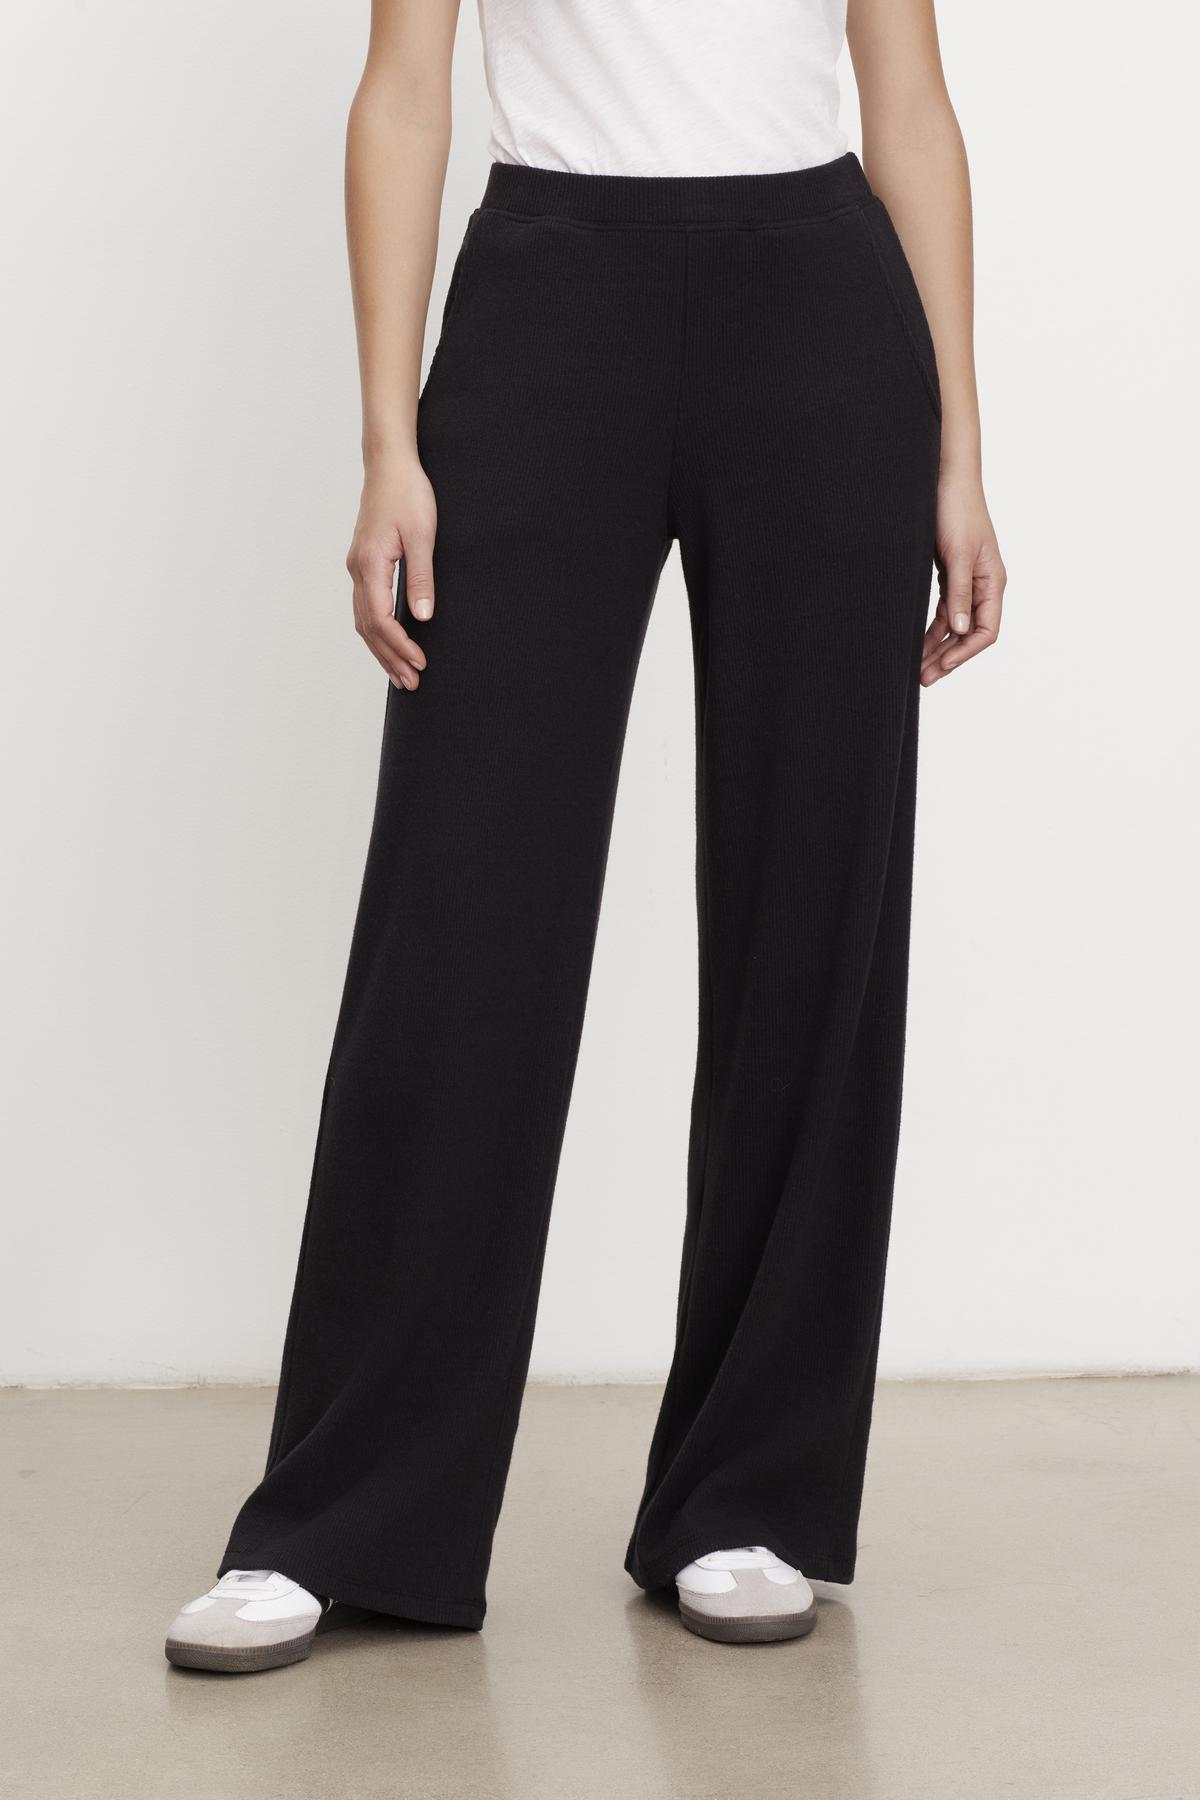 A woman wearing Velvet by Graham & Spencer KACIE BRUSHED RIB PANT and a white t-shirt.-35701975285953